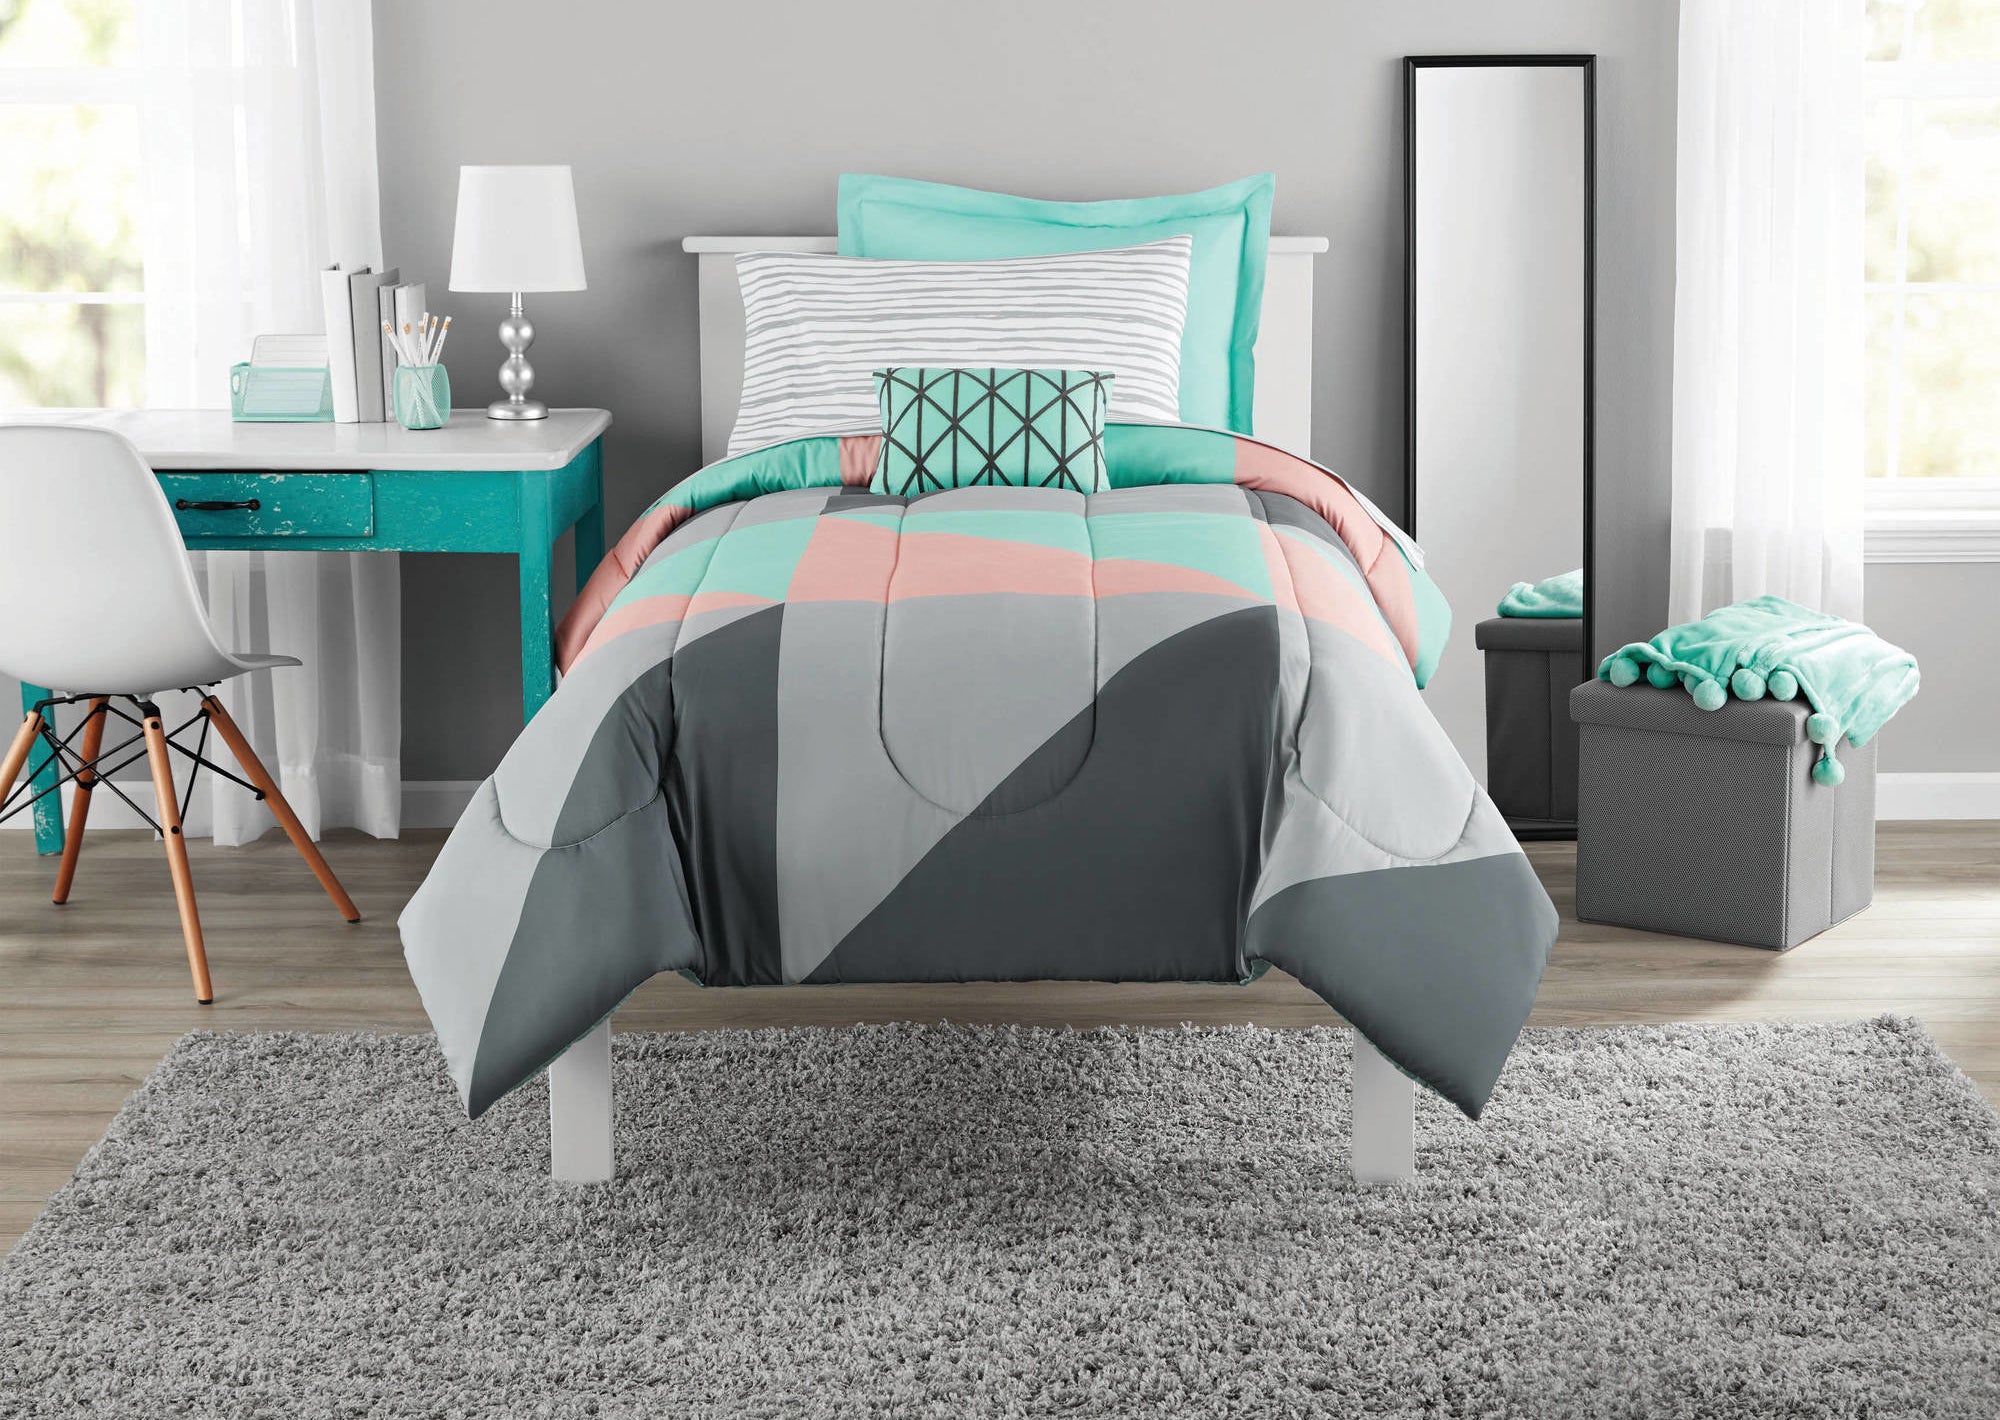 Gray, teal and pink bed in a bag set